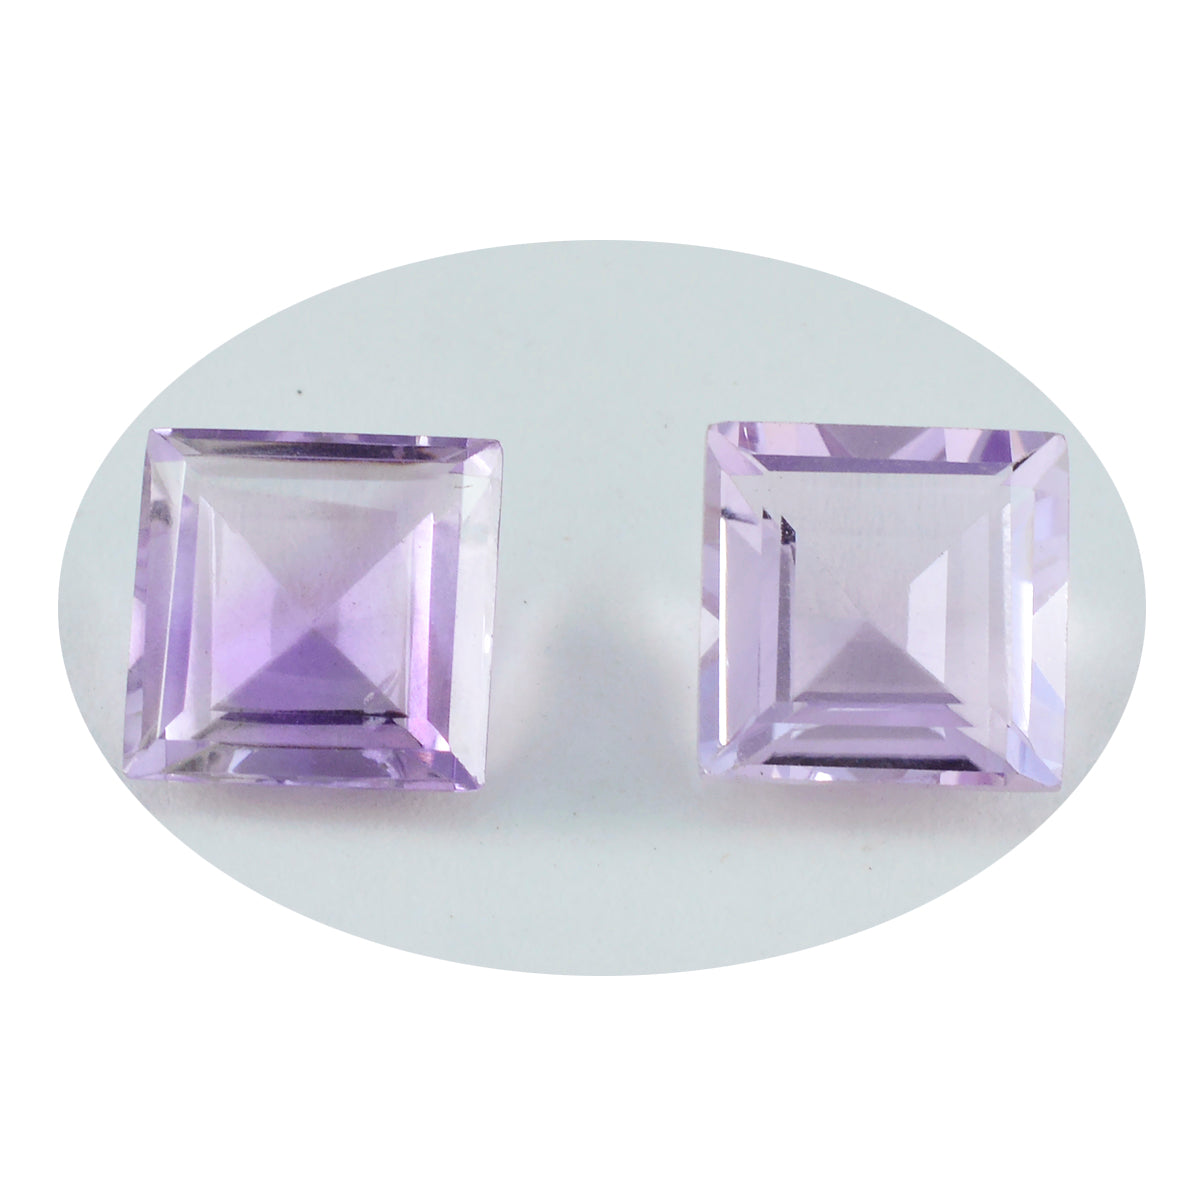 Riyogems 1PC Natural Purple Amethyst Faceted 14x14 mm Square Shape excellent Quality Loose Gemstone